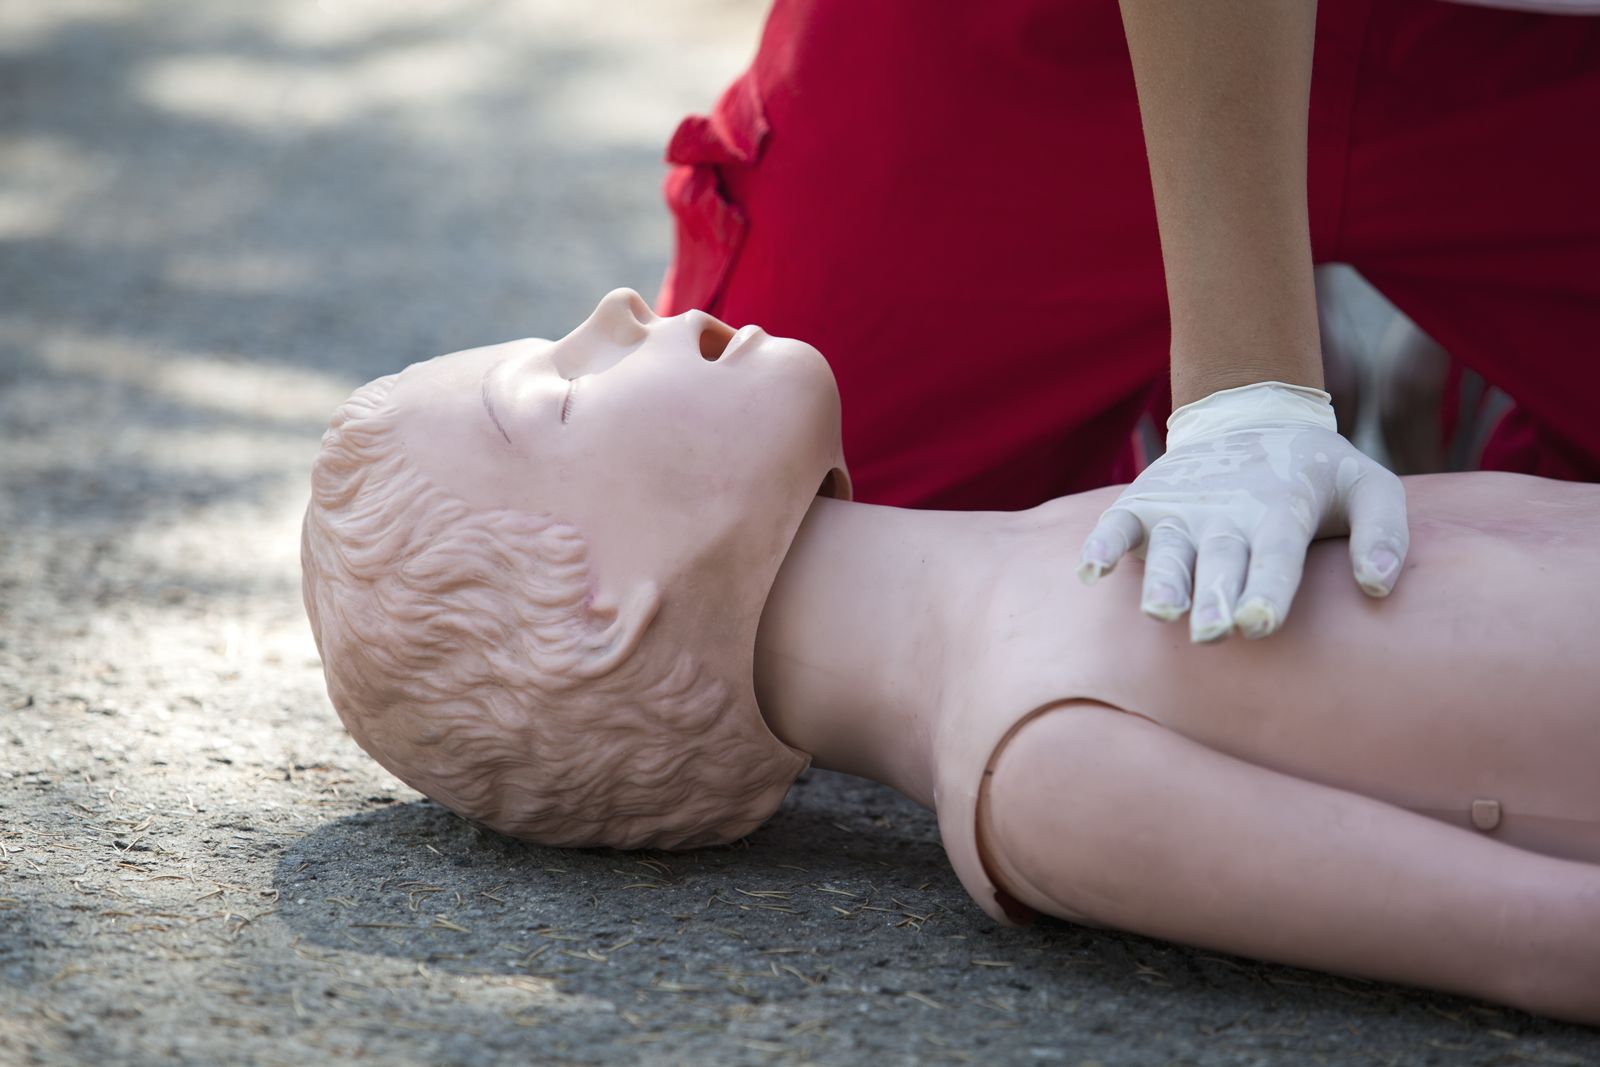 someone performing cpr on a child dummy shutterstock